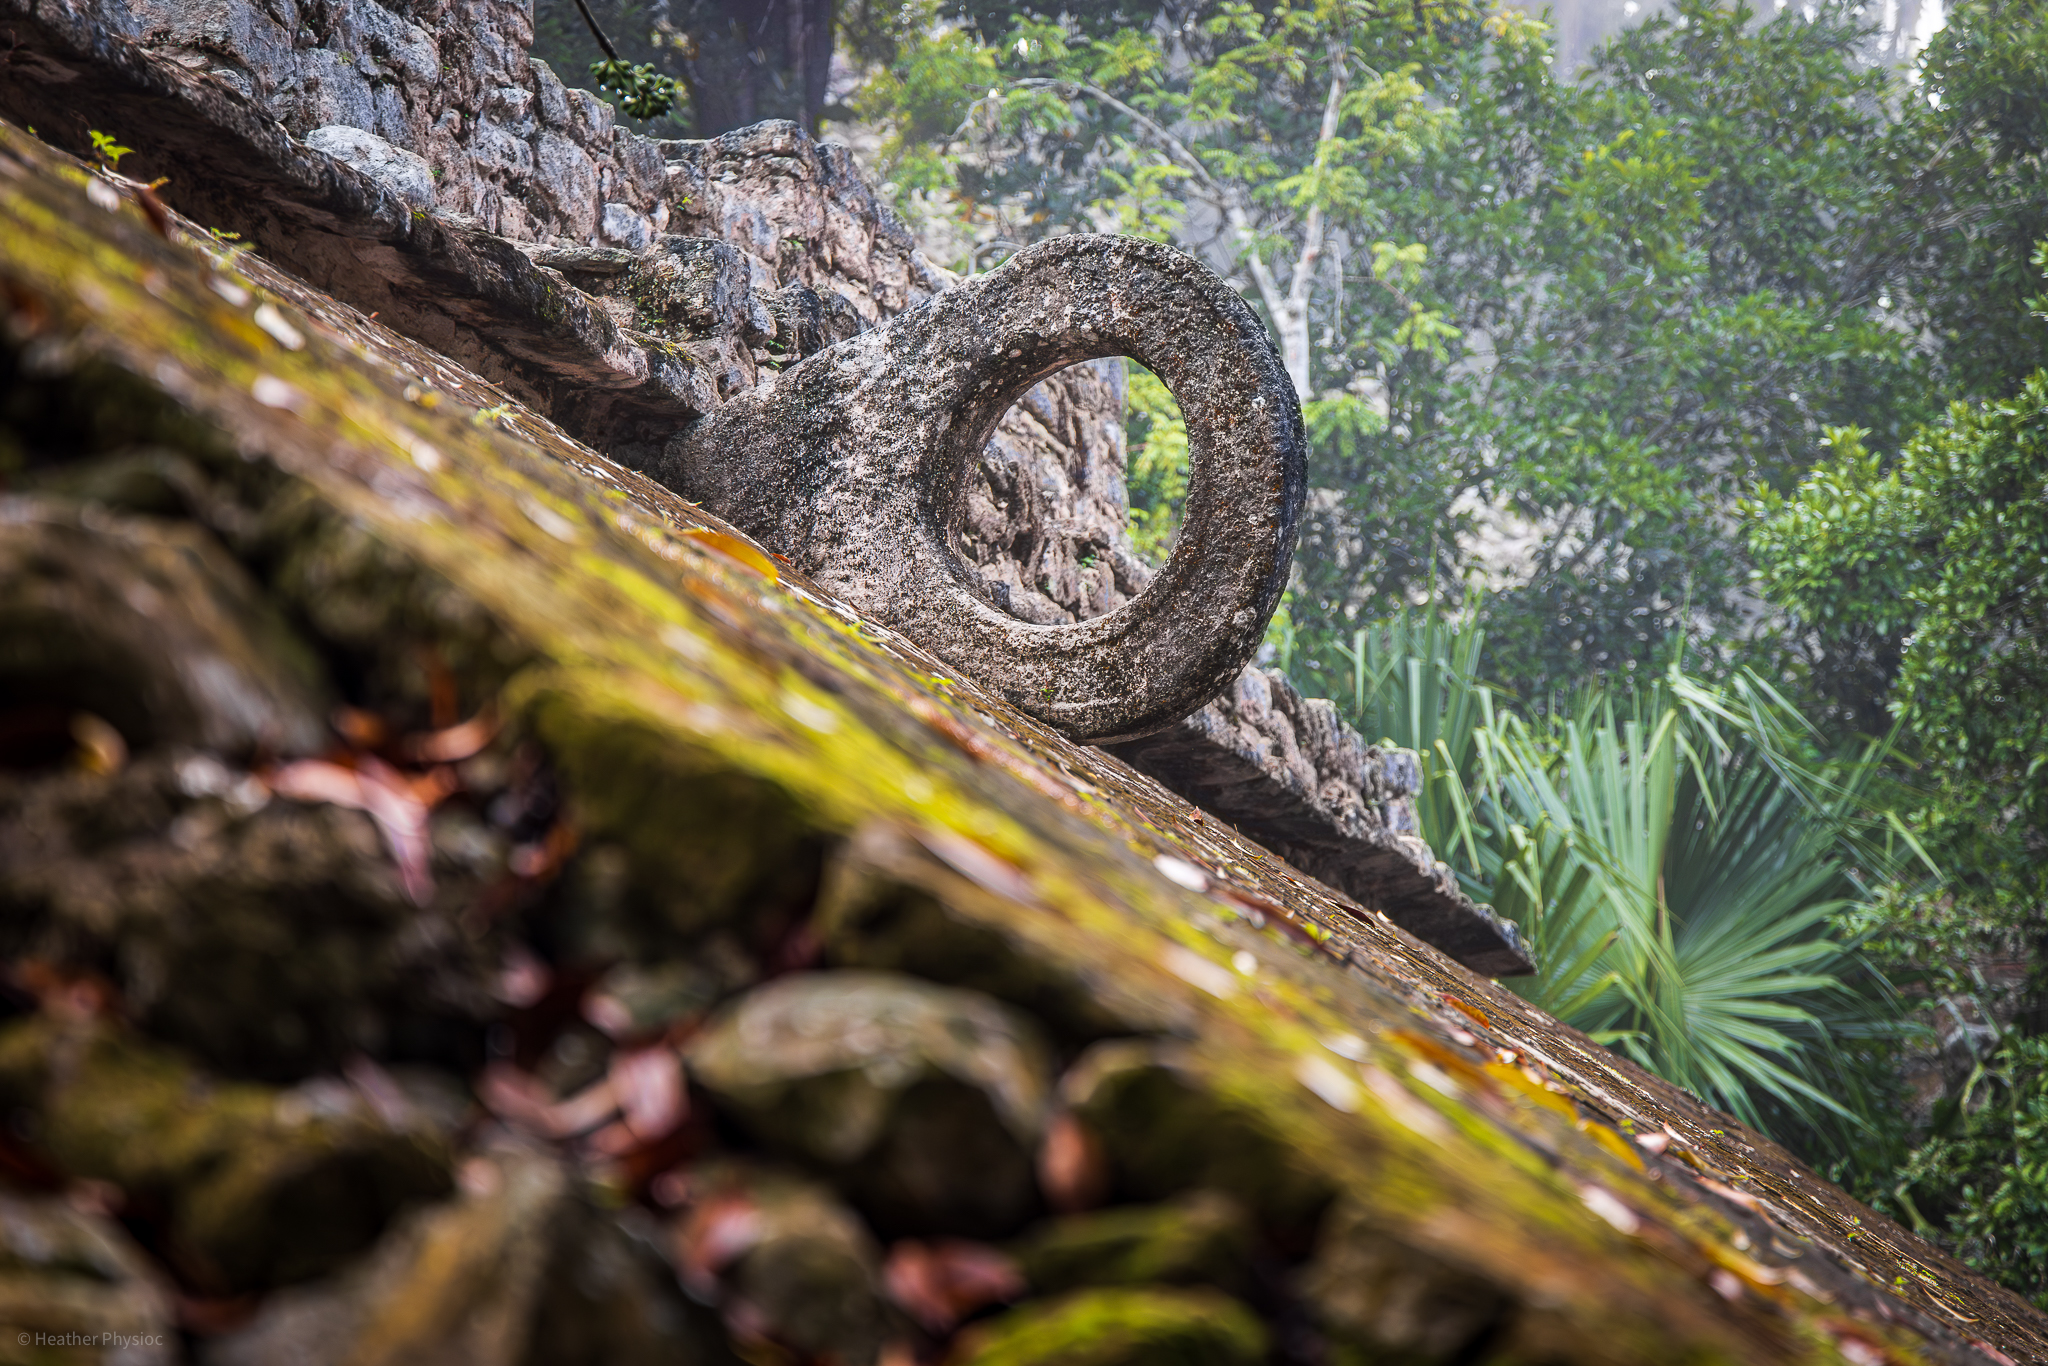 A focused view of the stone hoop from the Mayan ball game court at the Coba archaeological site in Yucatan, Mexico. The hoop is perched on a textured wall, with the verdant jungle softly blurred in the background, casting a historical ambiance over the ancient sport's relic.